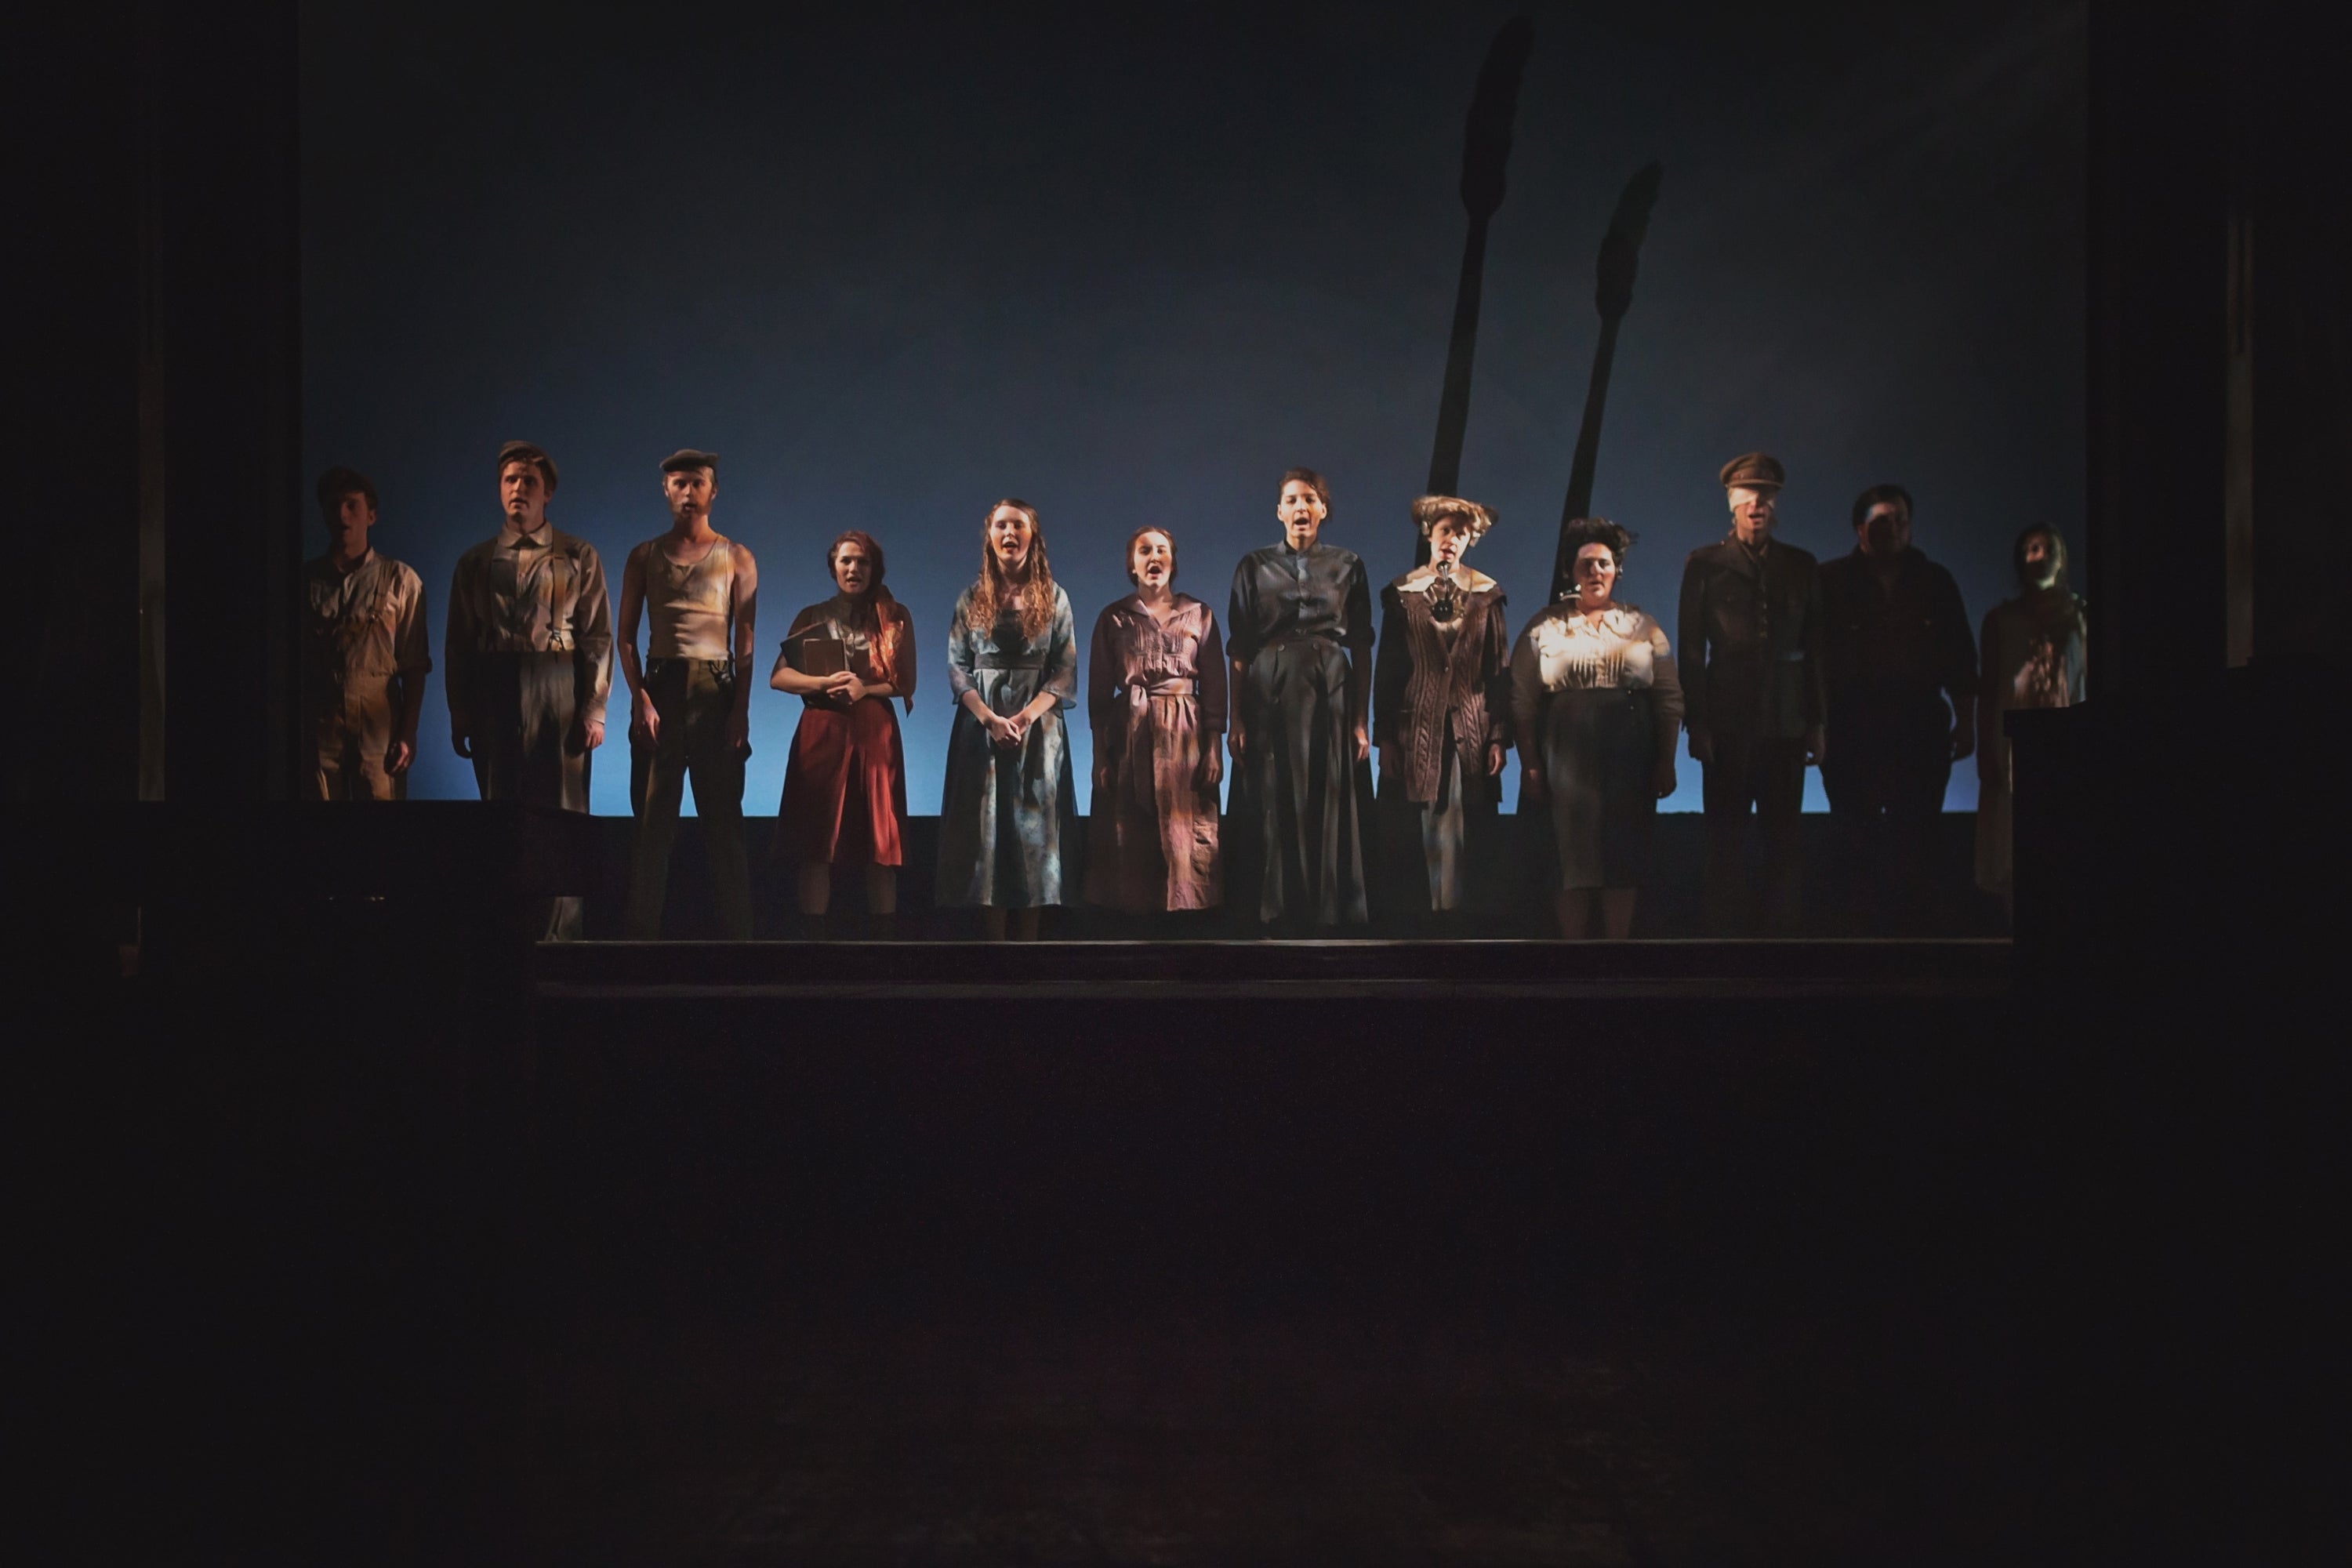 The full cast is standing on stage